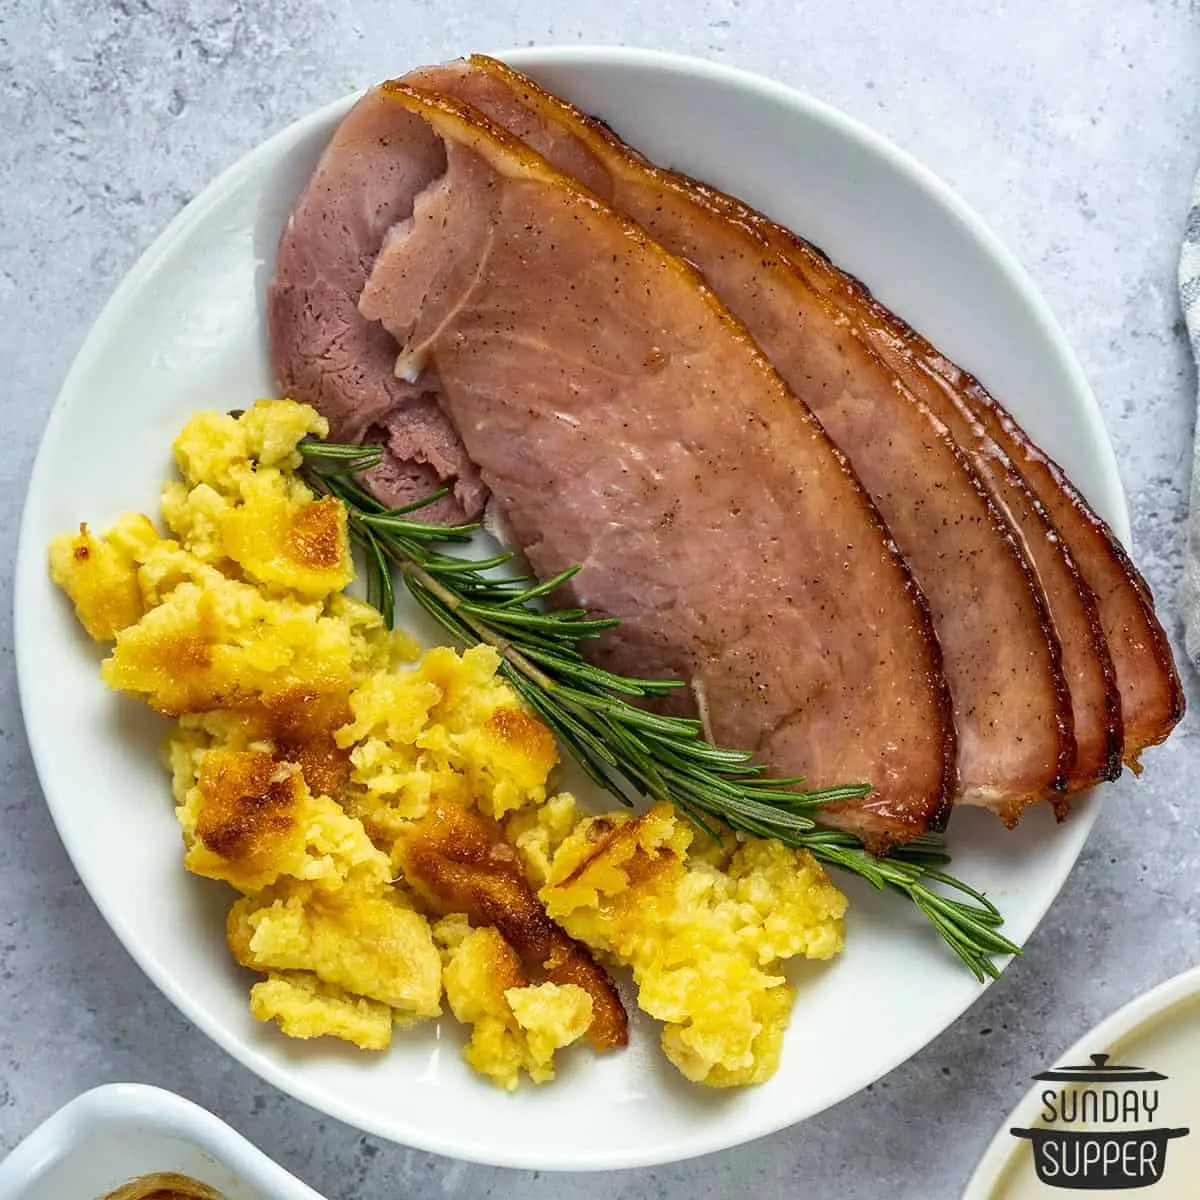 what to serve with smoked ham - What are common side dishes